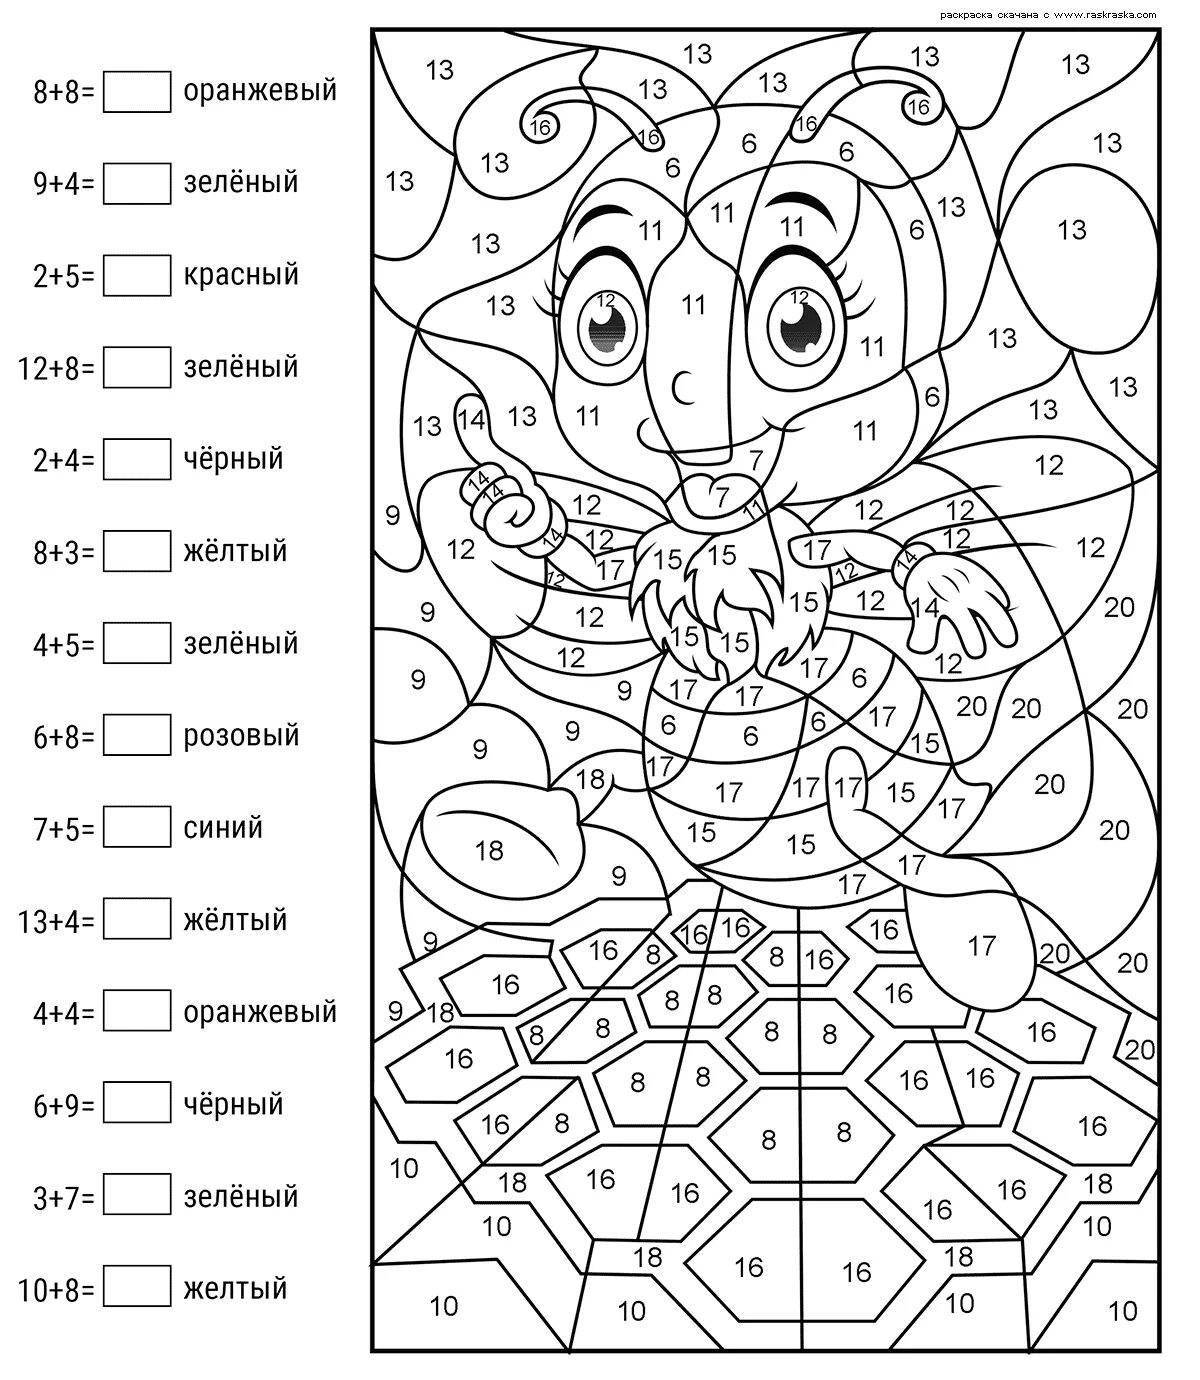 Examples of brilliant coloring pages